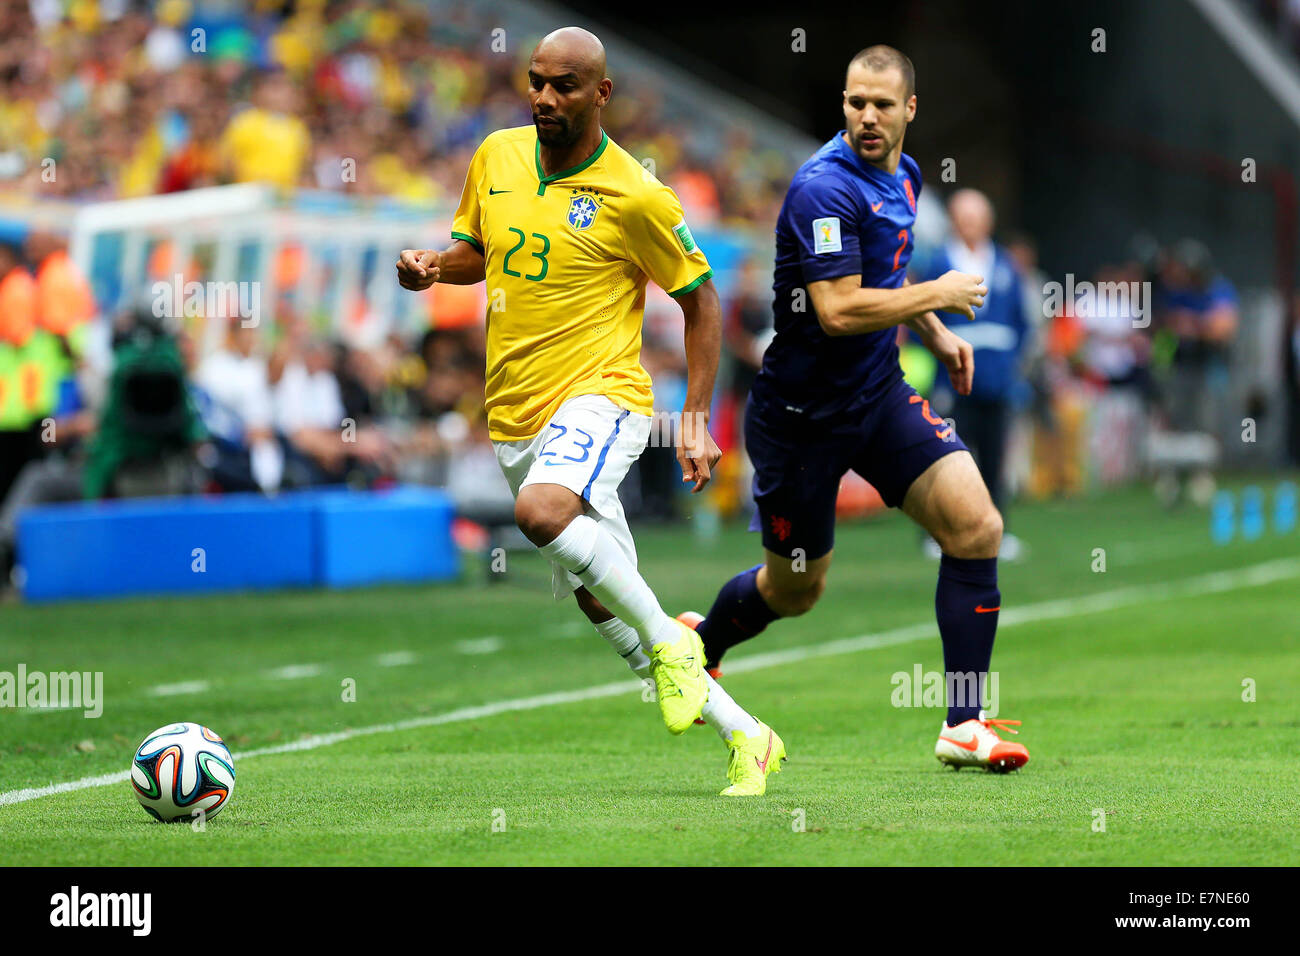 Maicon. Brazil v Holland. Play-0ff for third place. FIFA World Cup 2014 Brazil. National stadium, Brasilia. 12 July 2014. Stock Photo